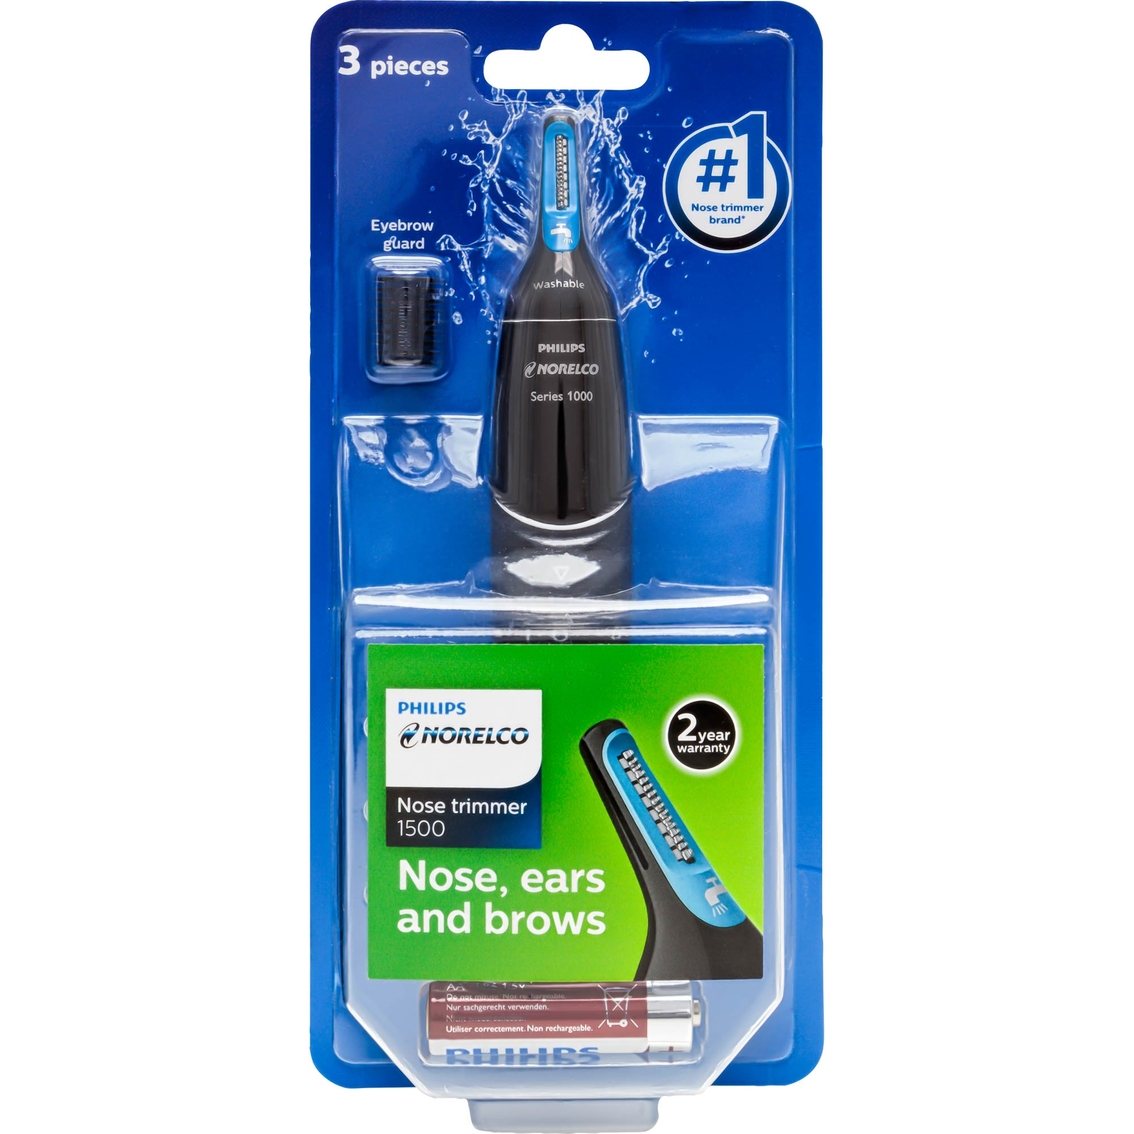 nose trimmer philips